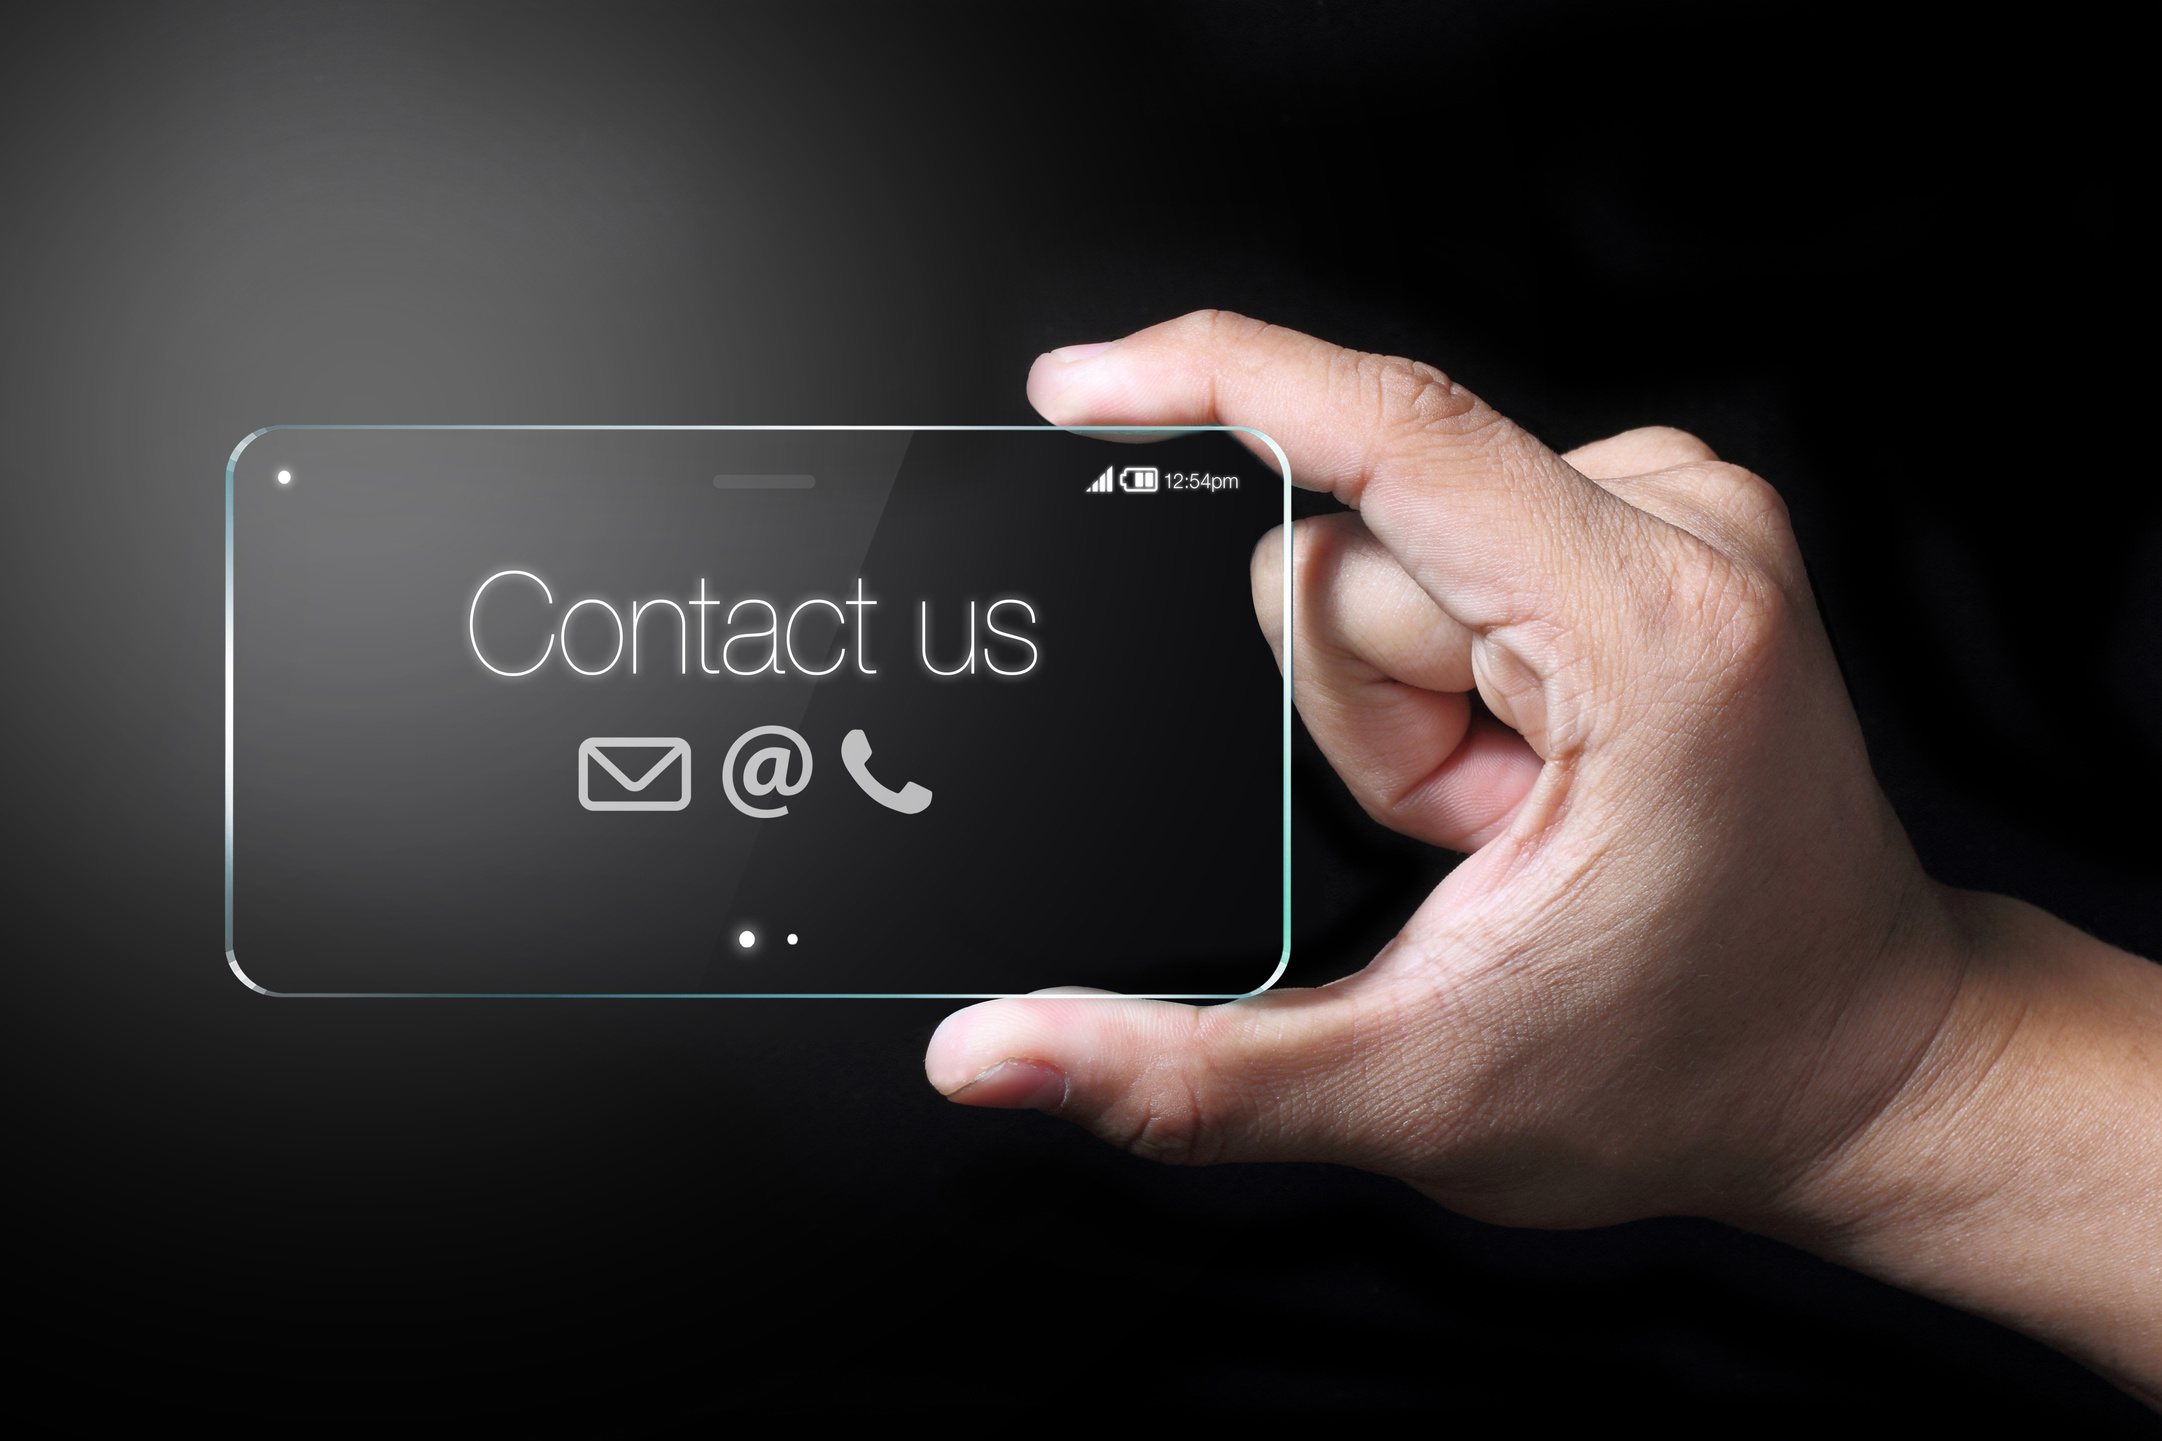 Contact us with smartphone and hand